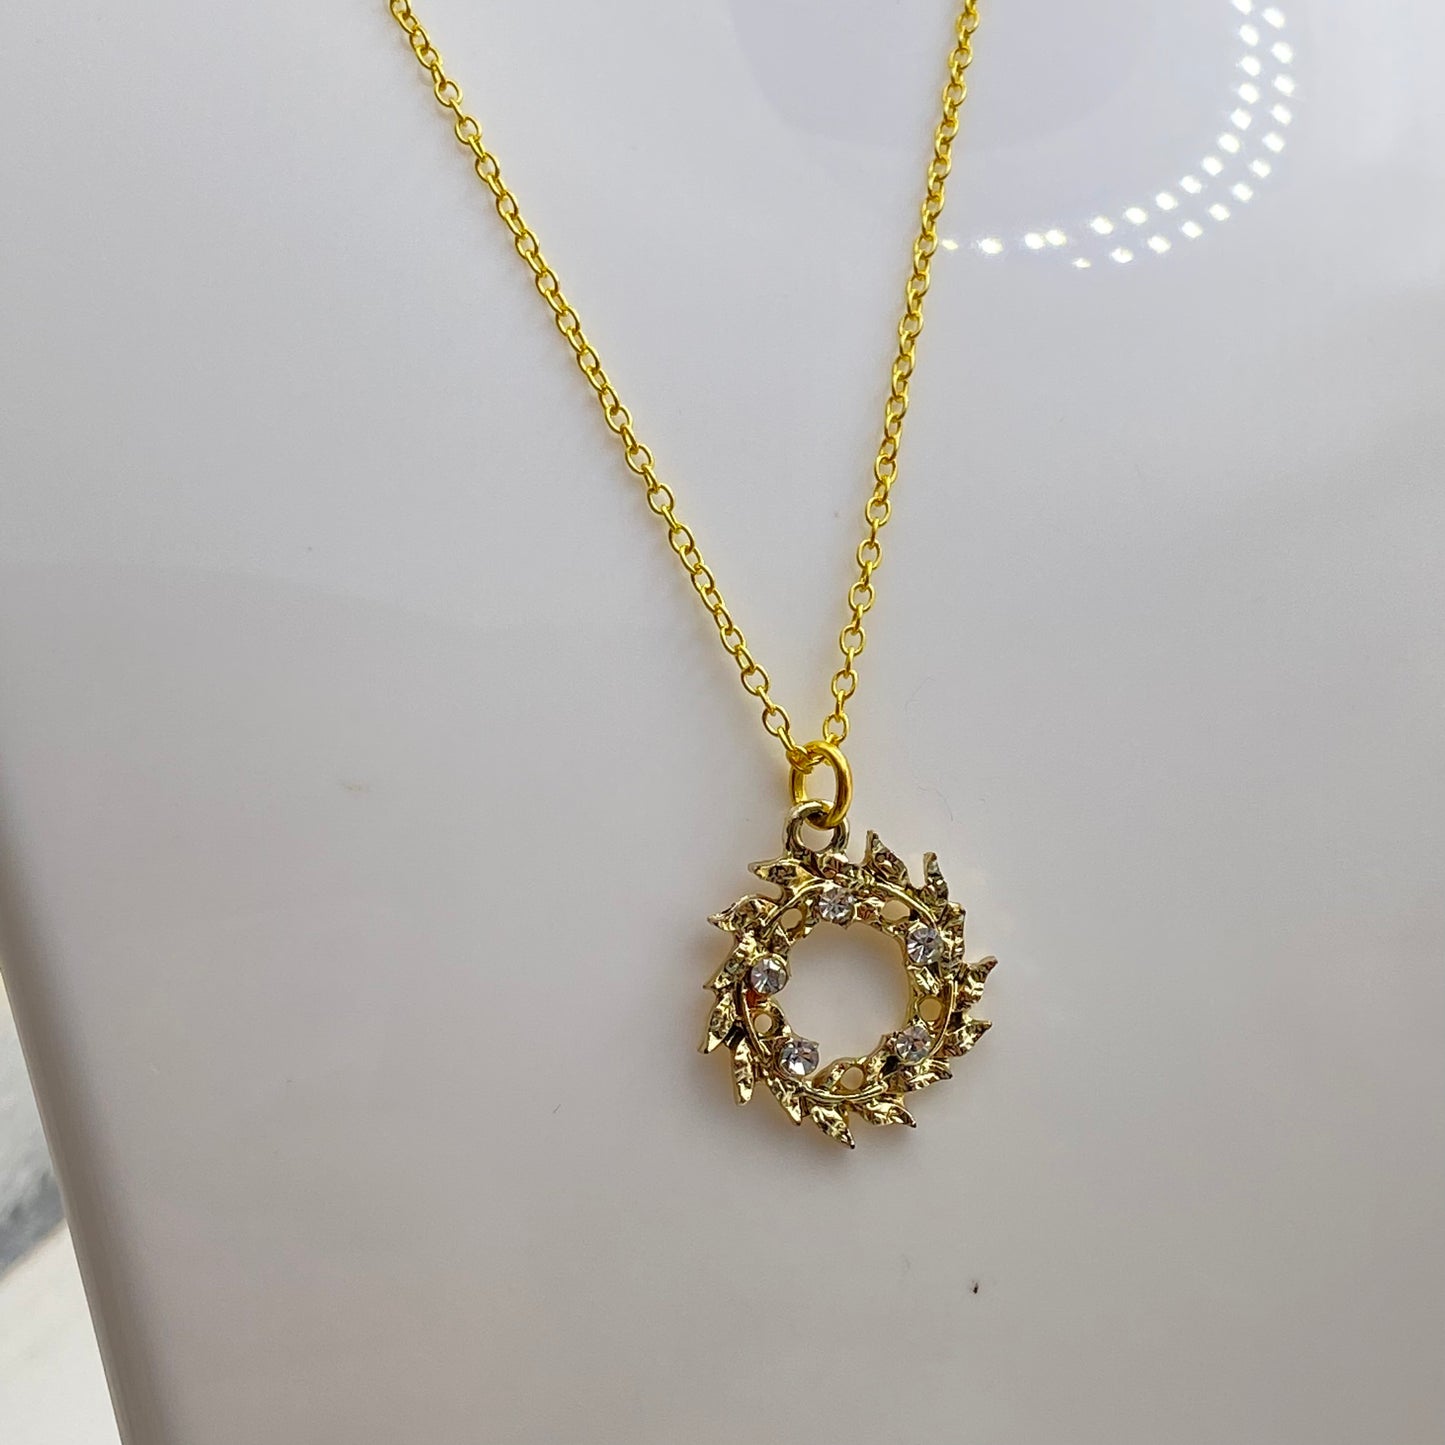 Gold Wreath Necklace